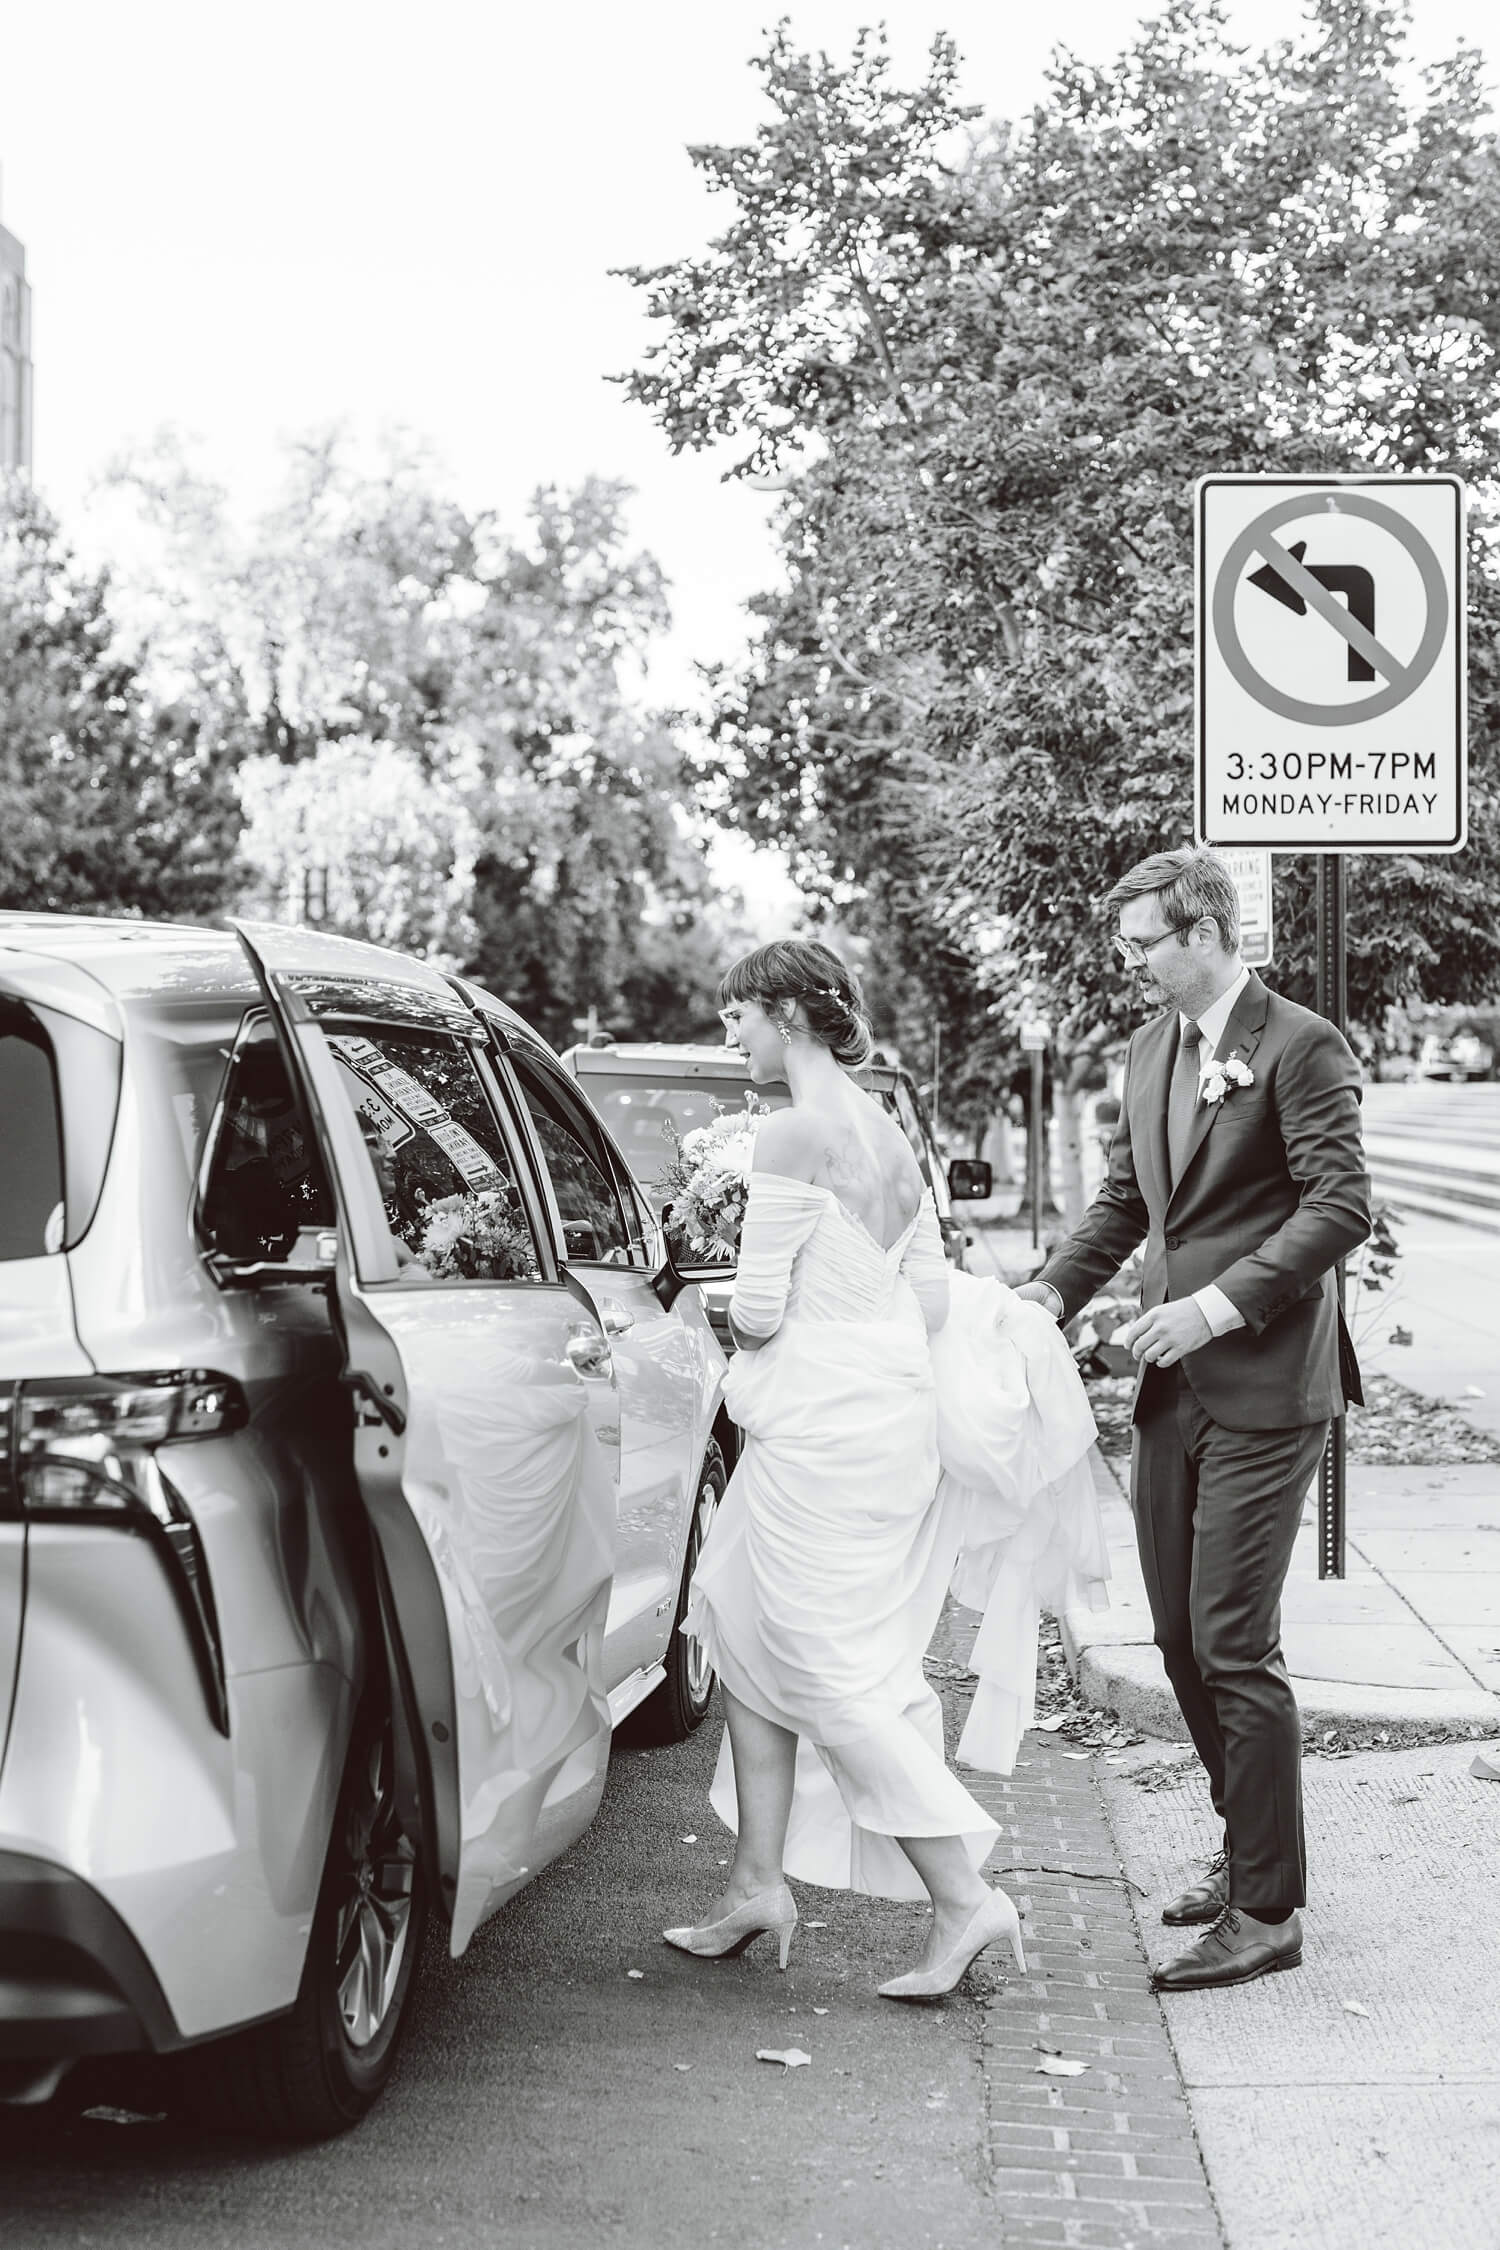 Groom helping bride into car after wedding ceremony | Brooke Michelle Photography